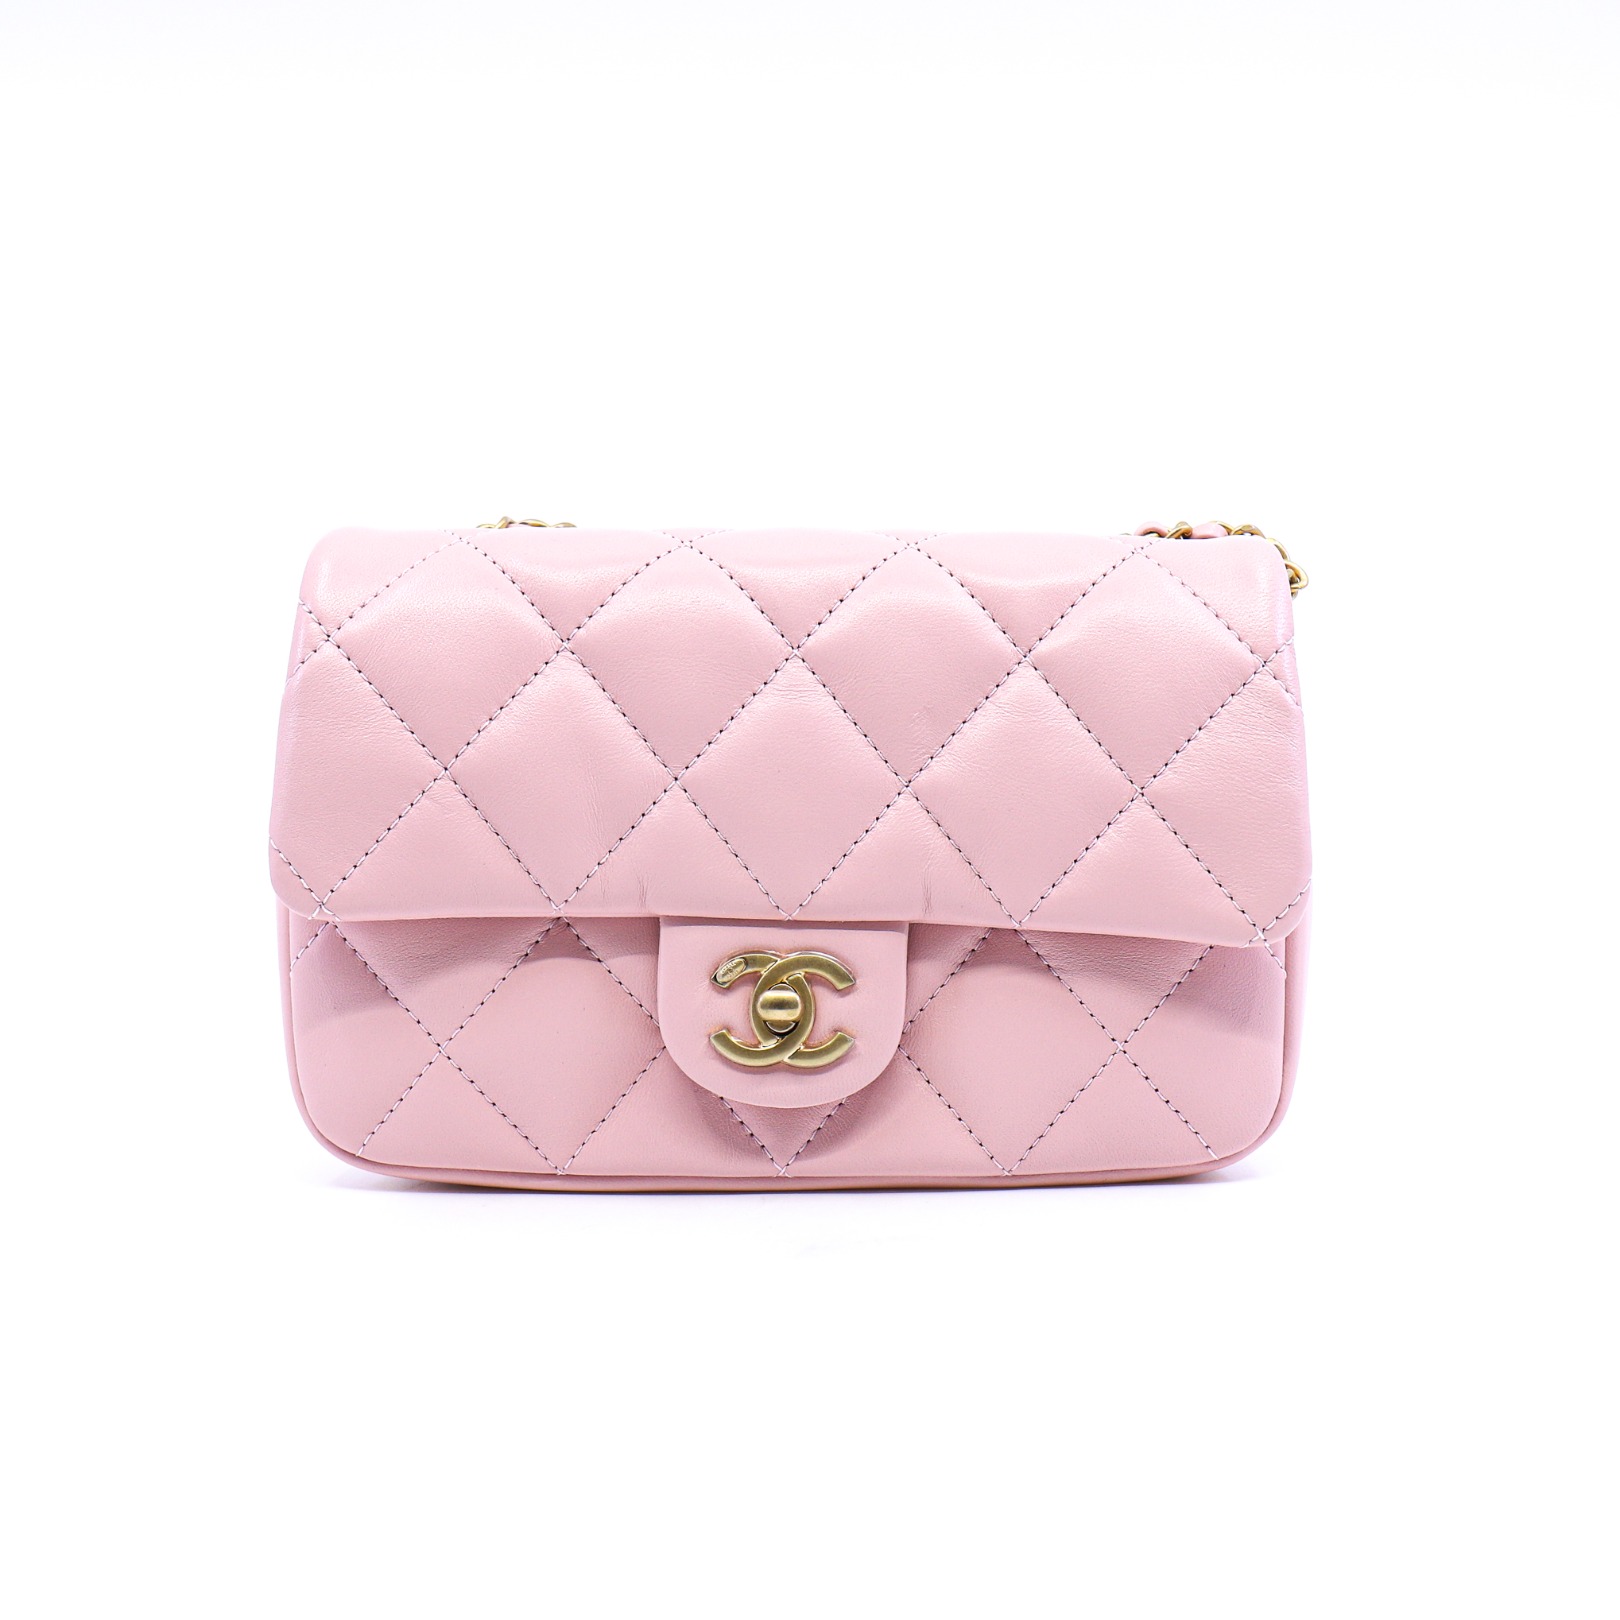 Chanel Pink Quilted Lambskin Leather Classic Mini Single Flap Bag